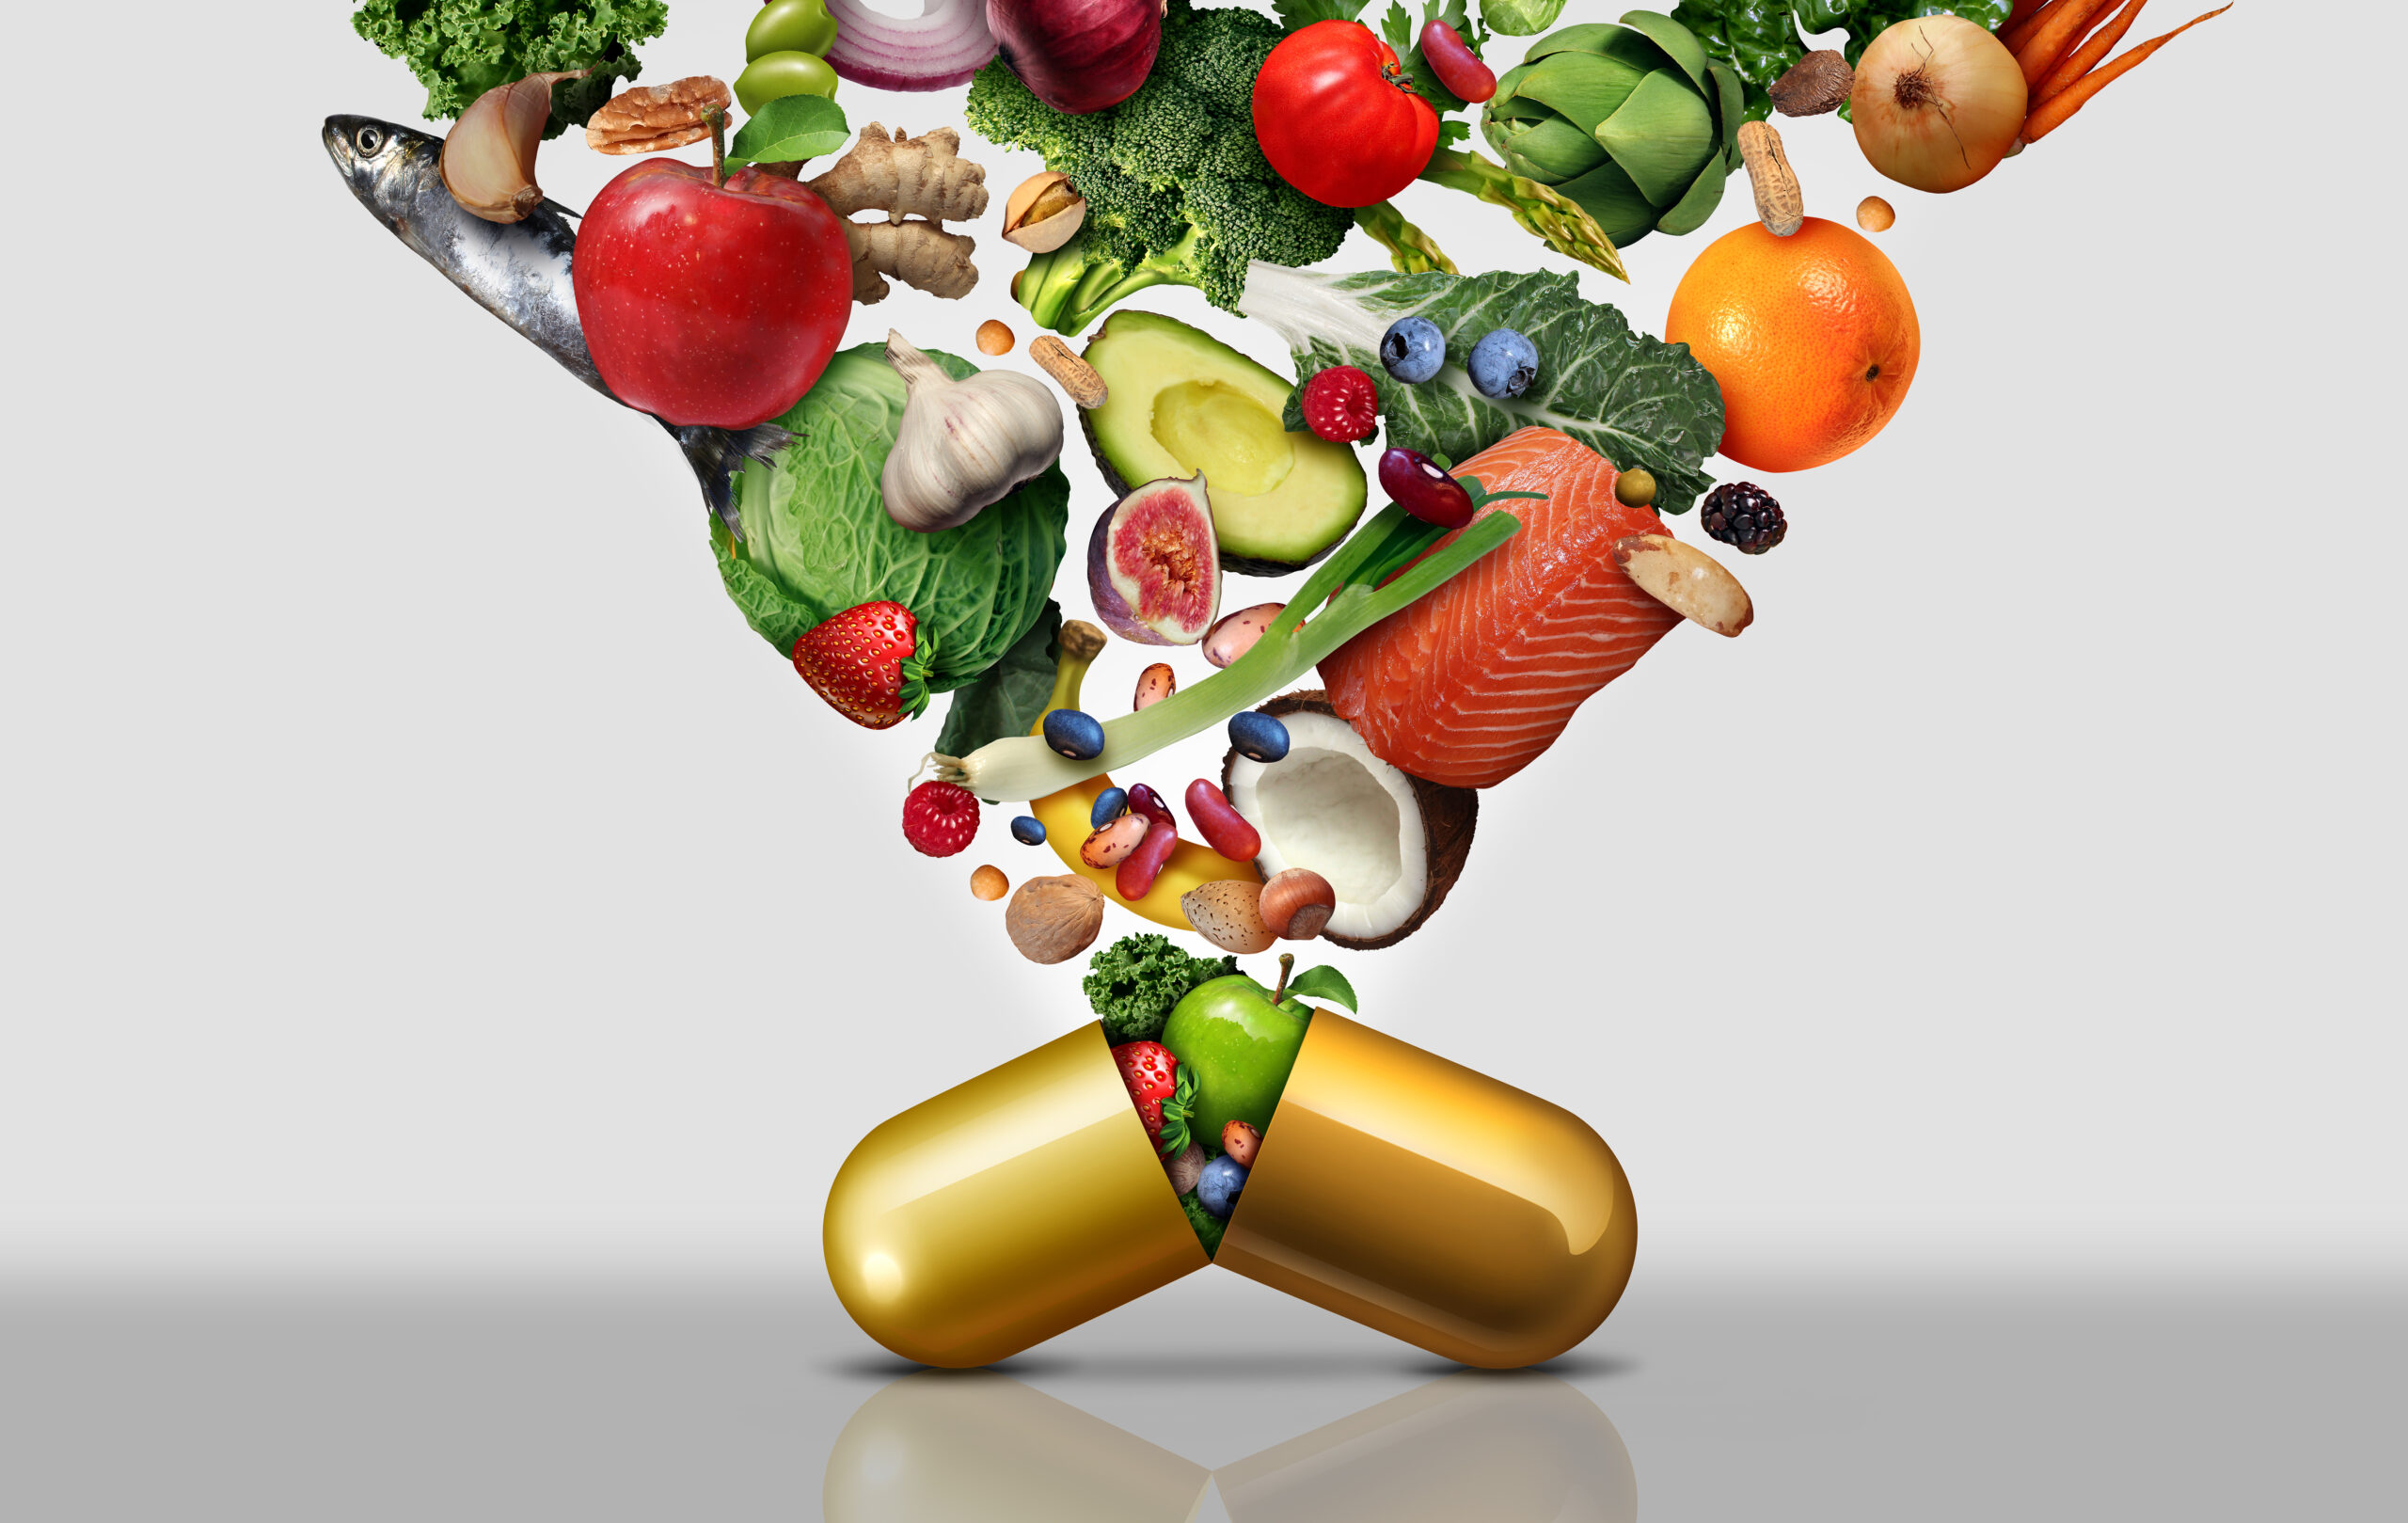 Gold pill capsule bursting open with a variety of fruits and vegetables shooting out of it and up out of the photo.